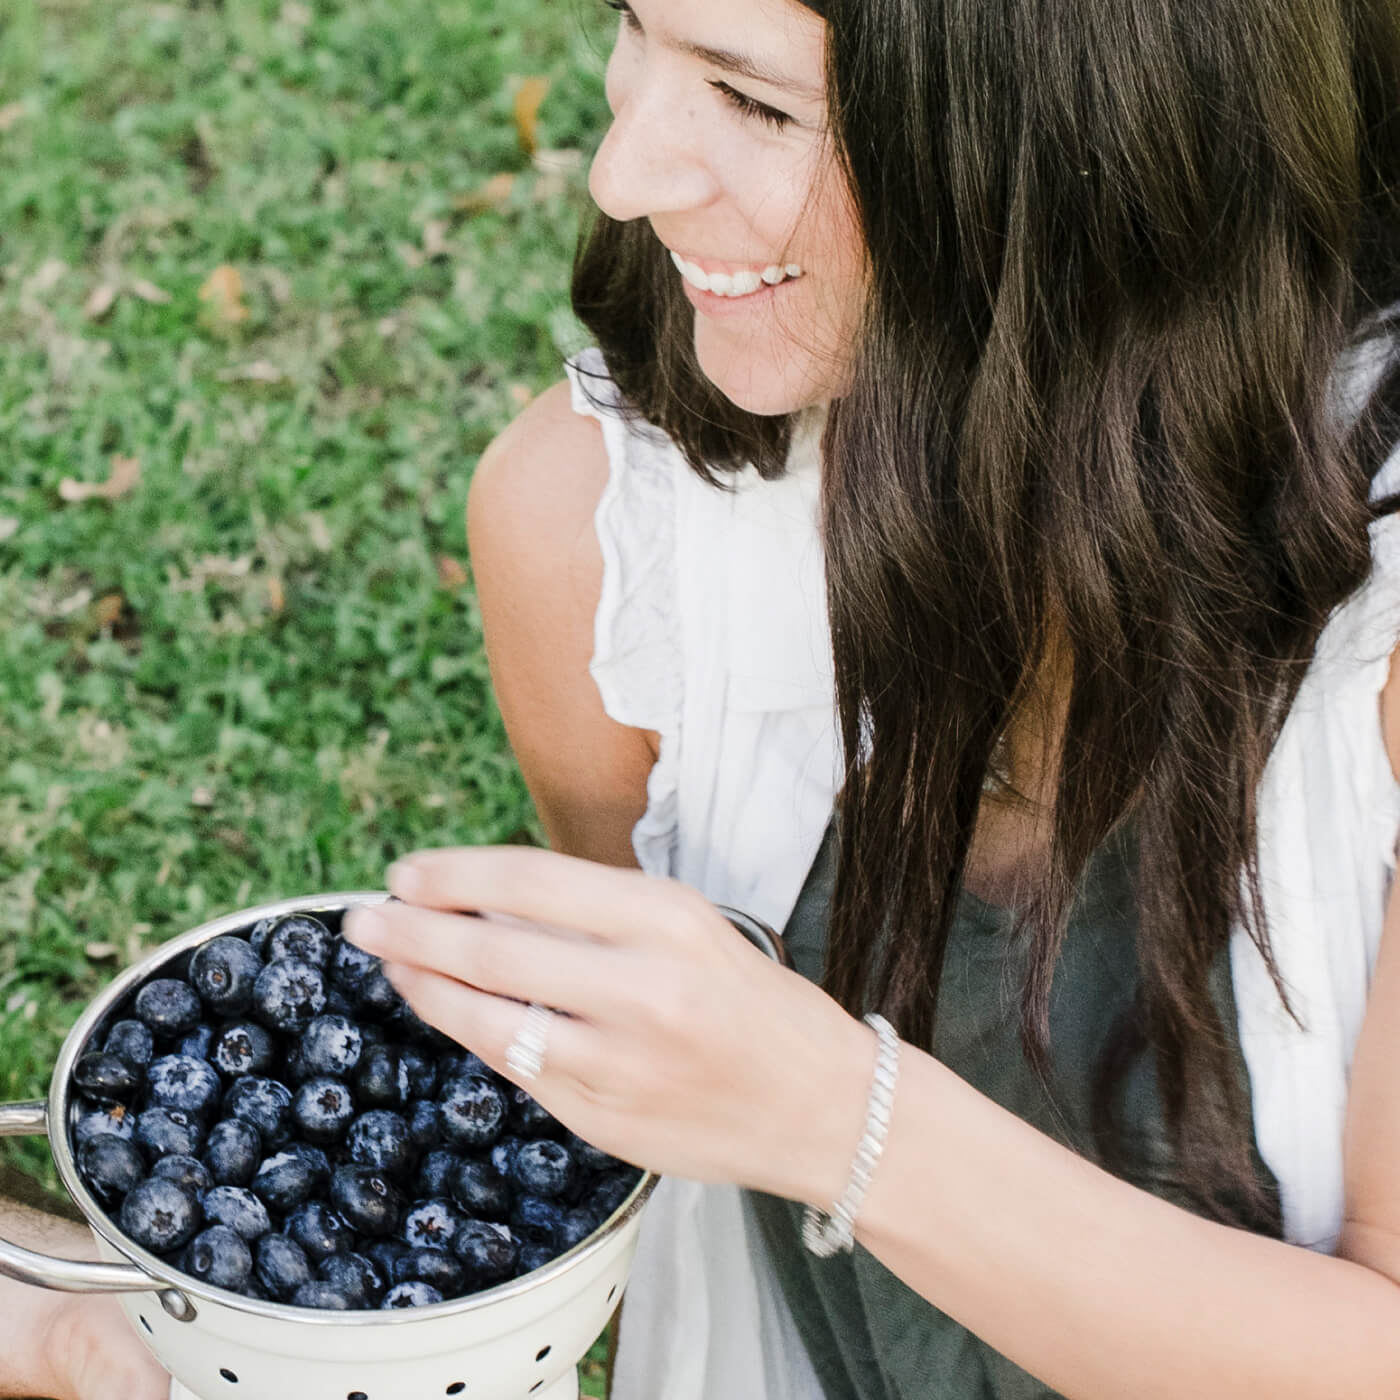 Image of person snacking on bluberries